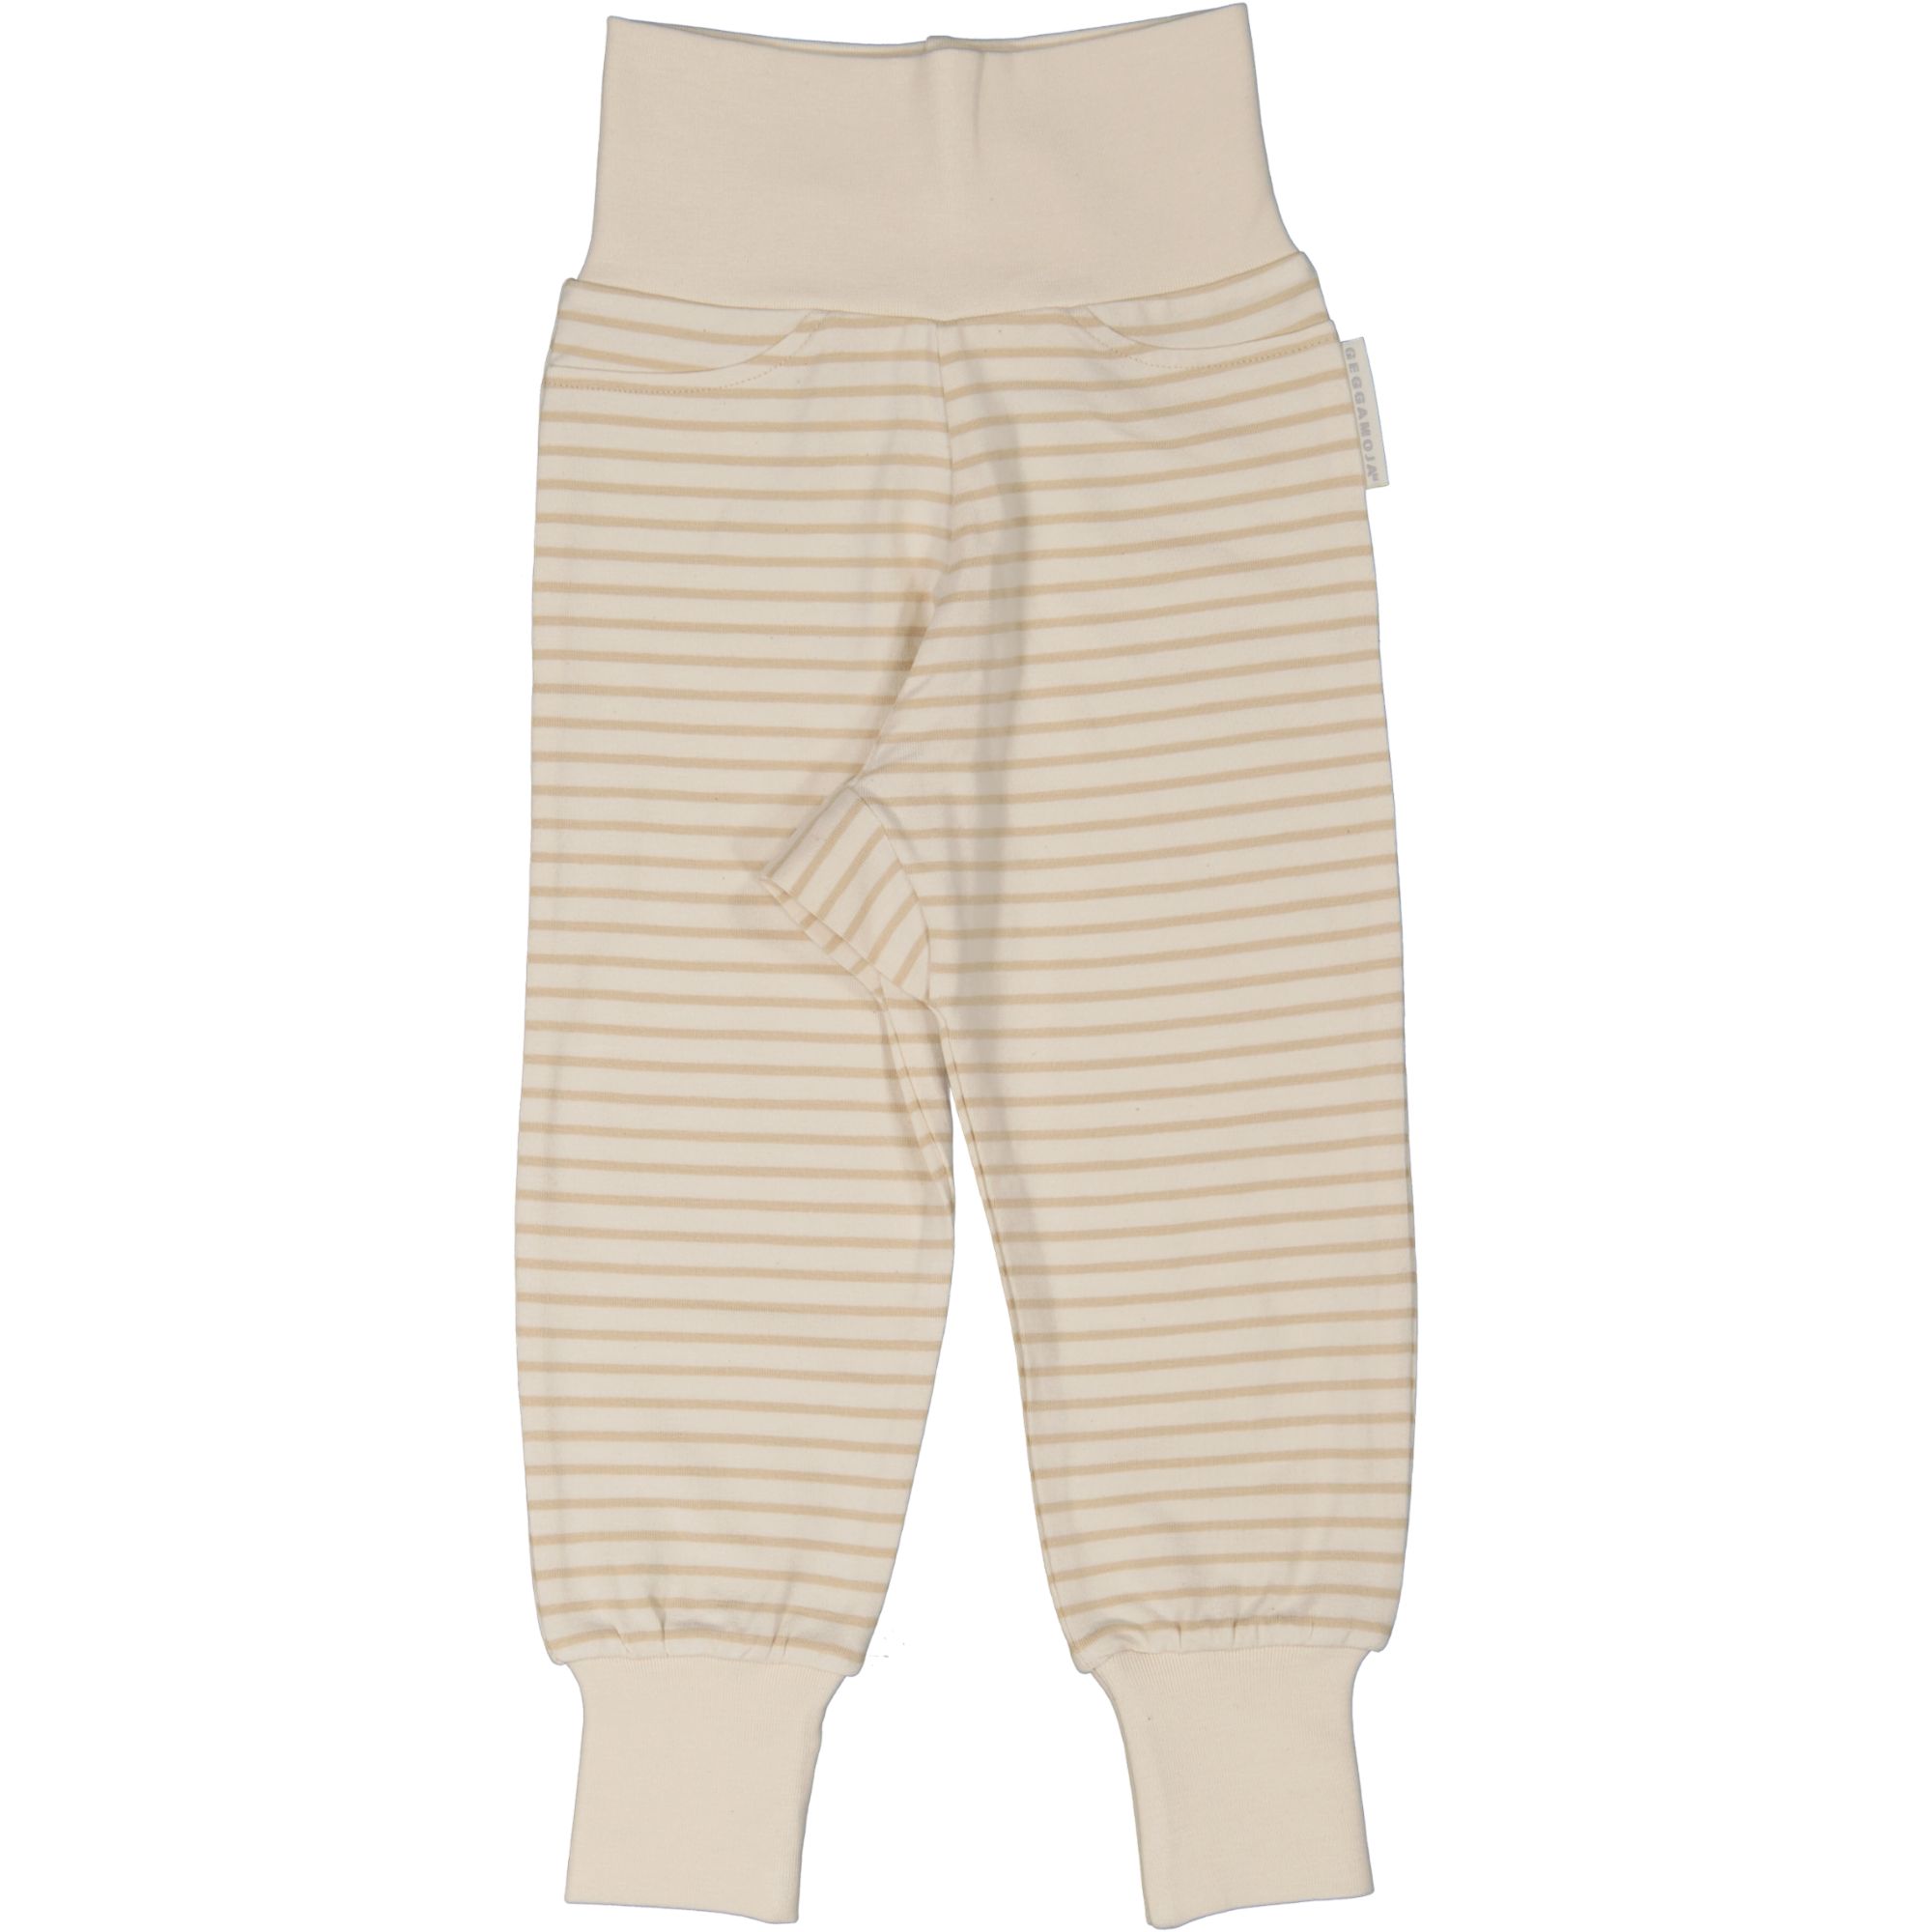 Baby pant Classic Offw/beige